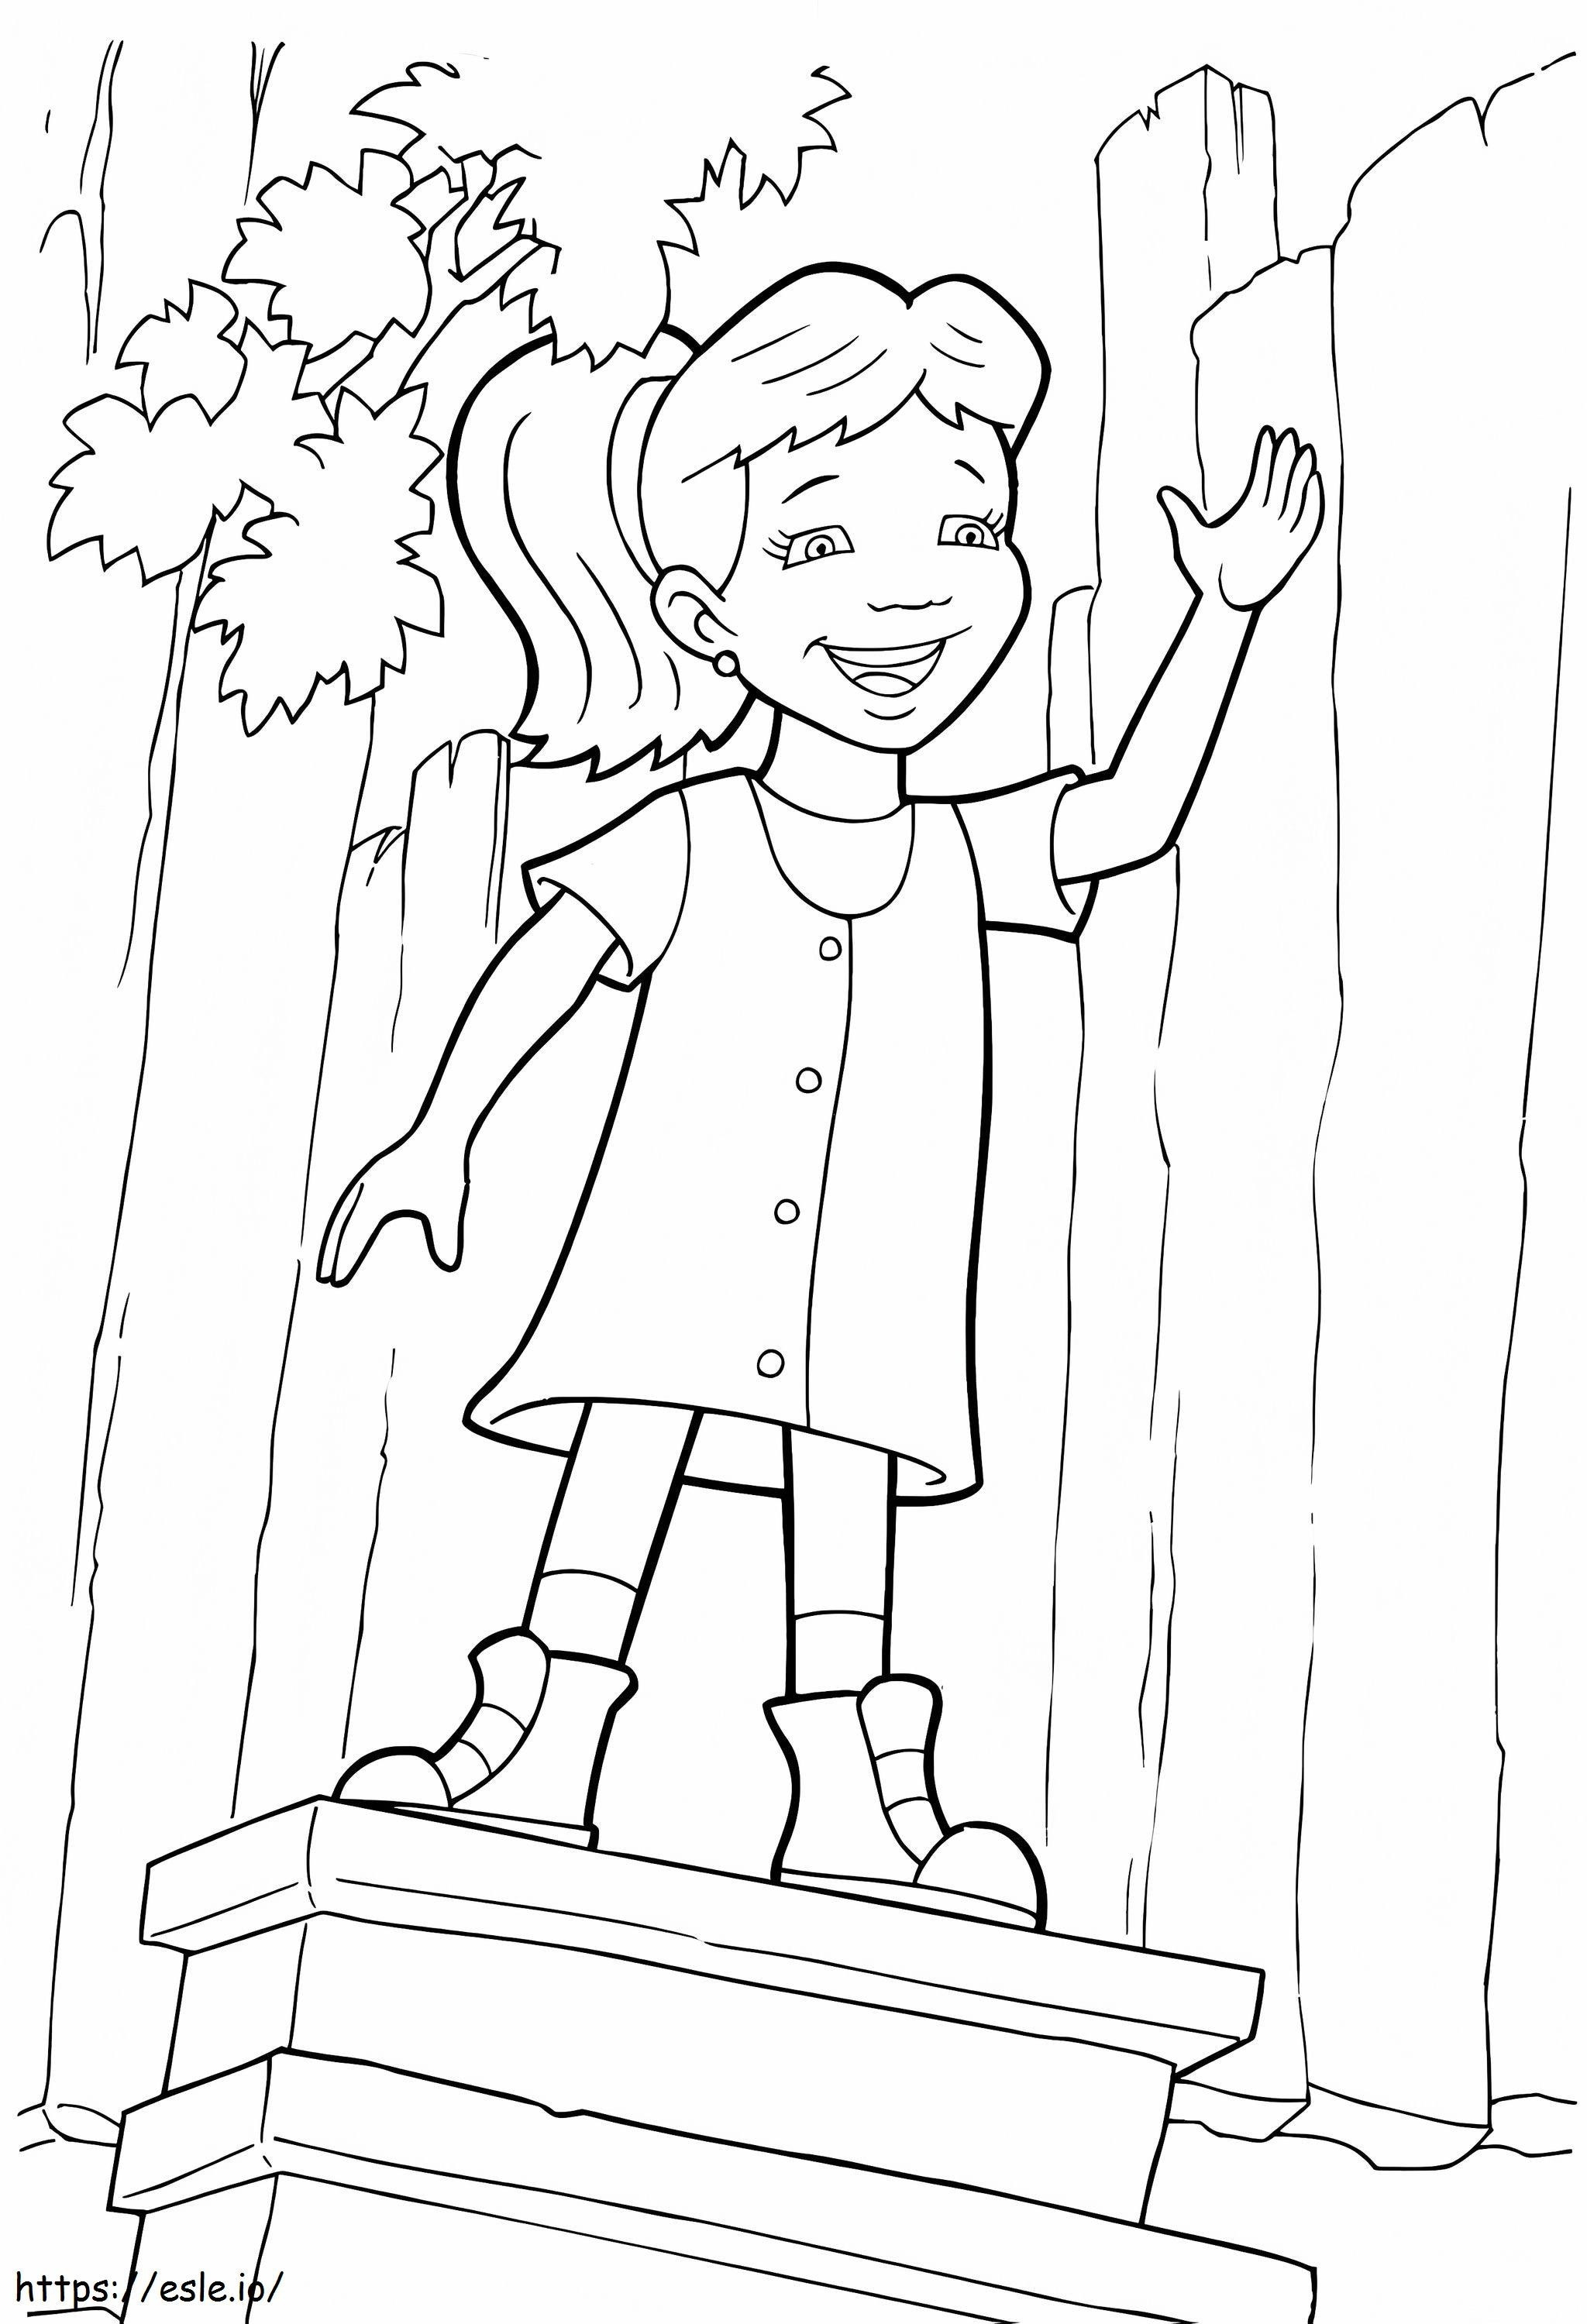 Emmy On The Top coloring page